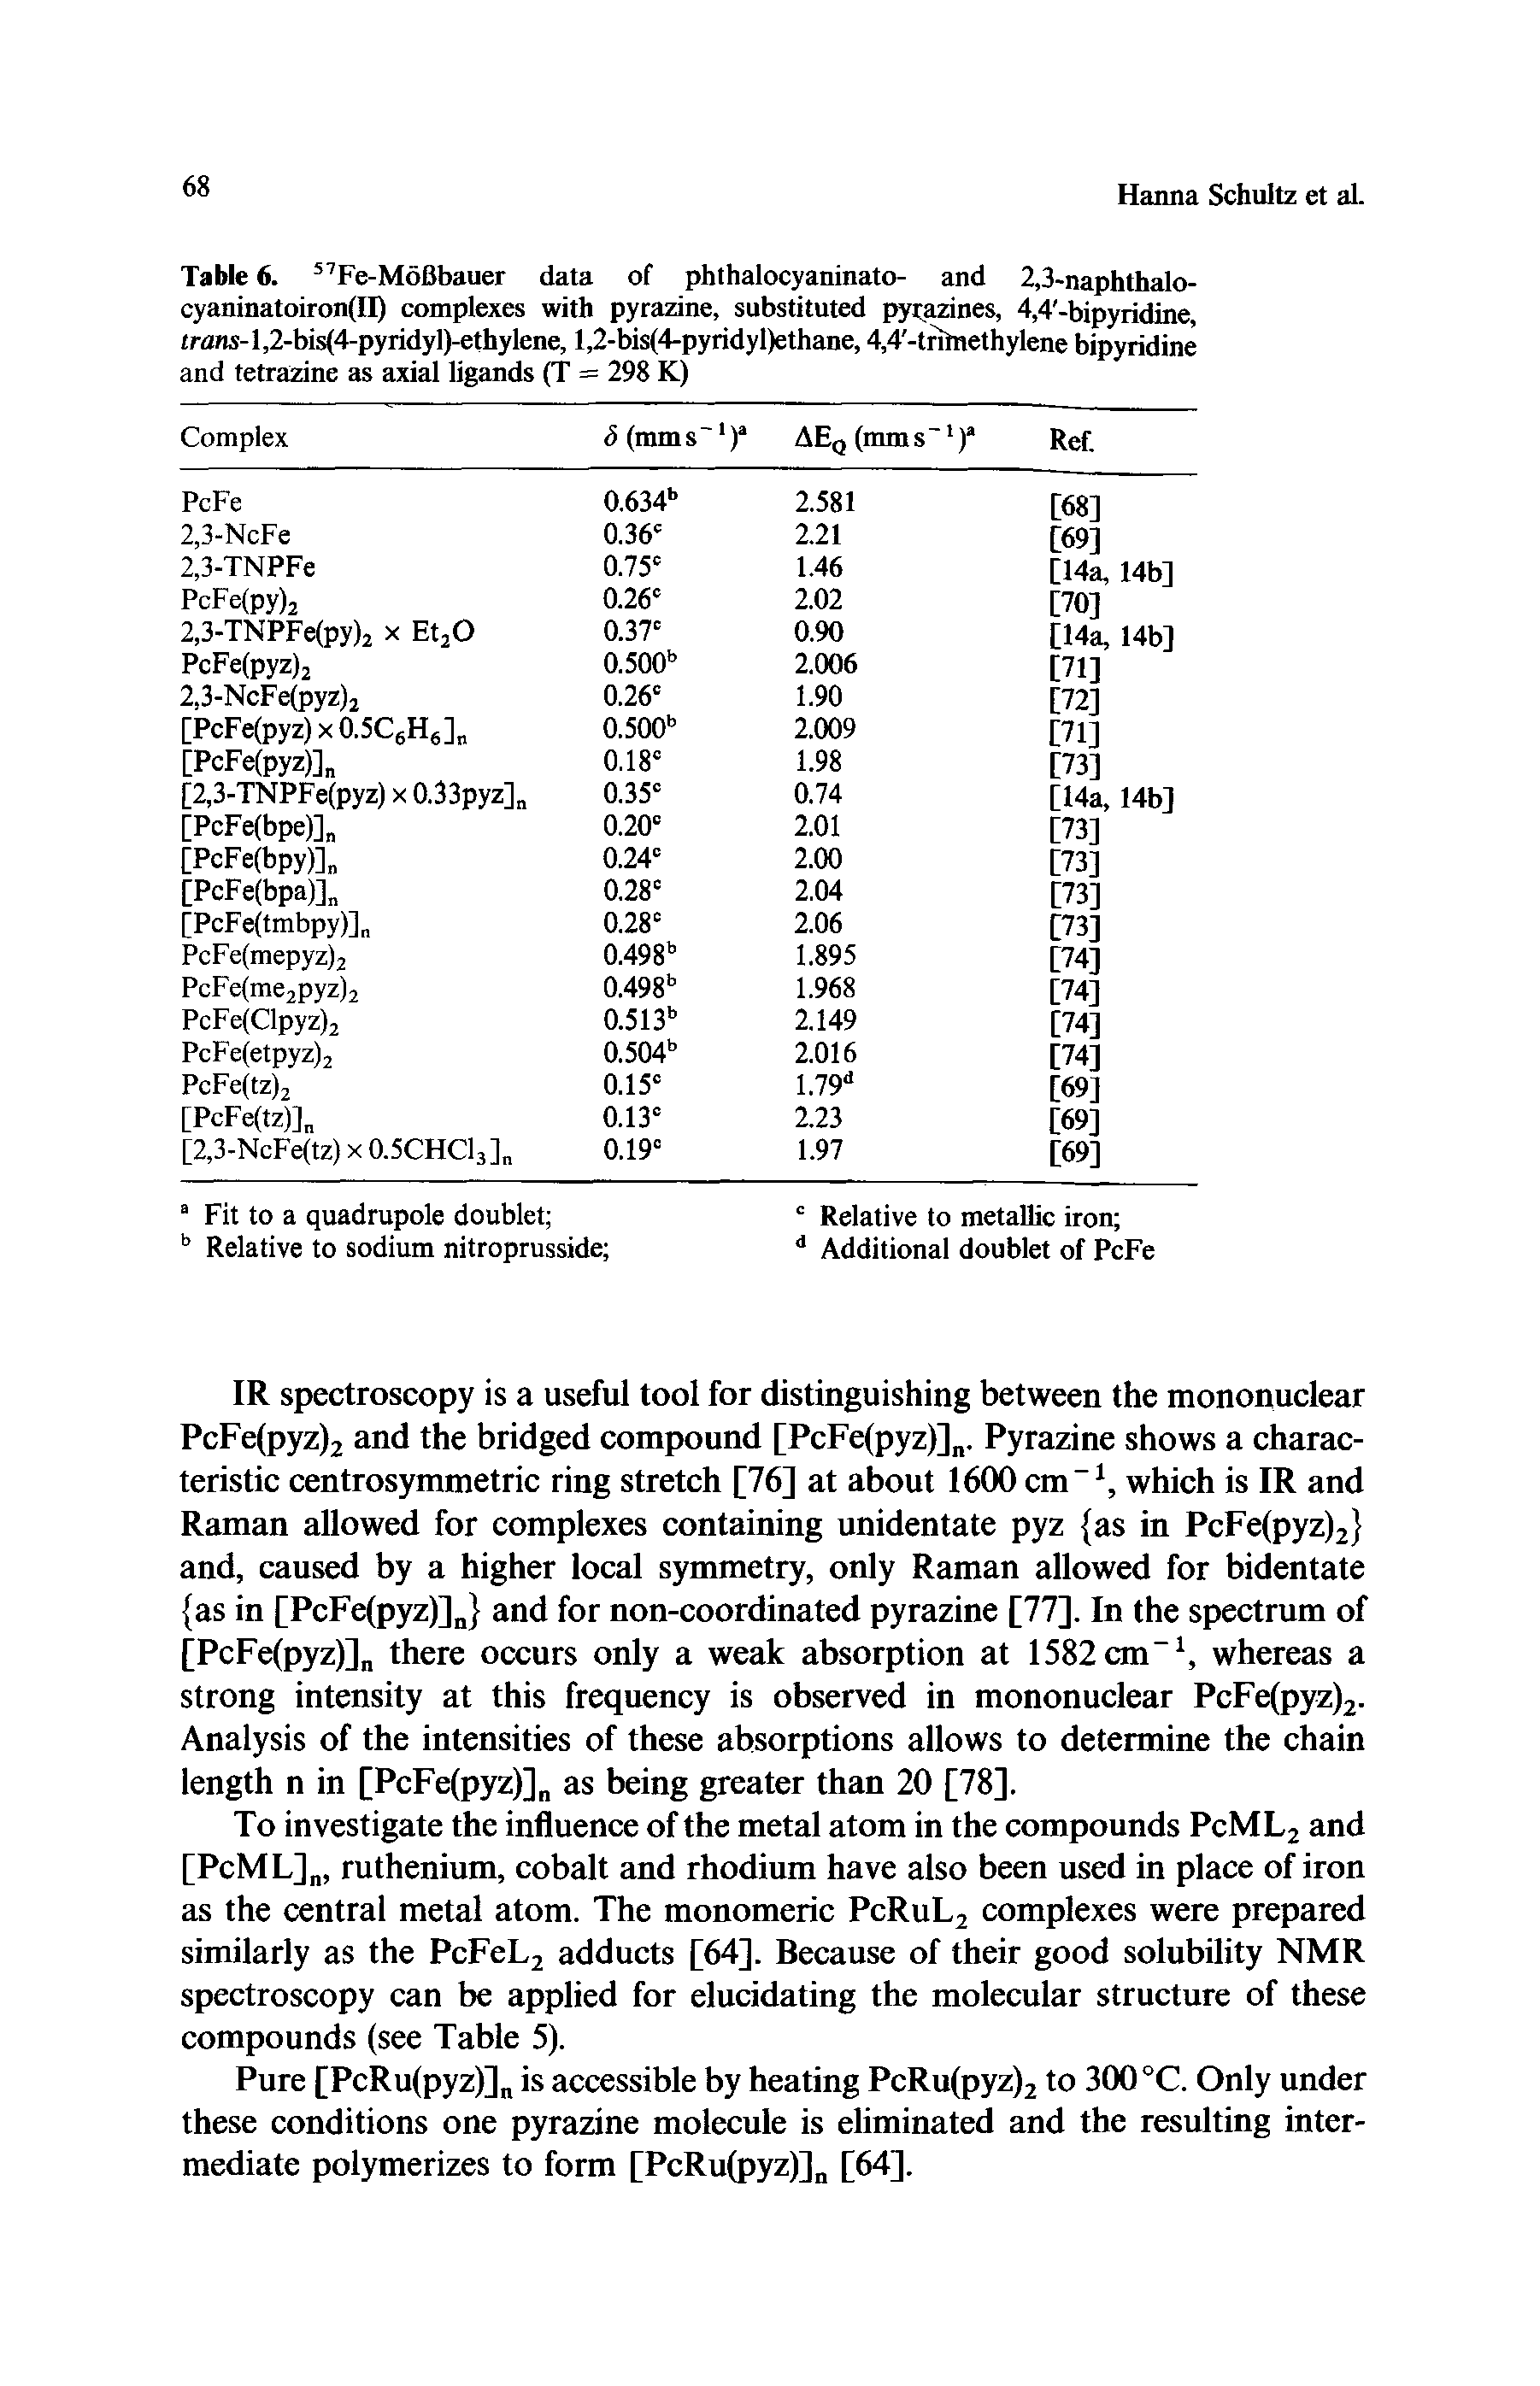 Table 6. Fe-MoBbauer data of pbthalocyaninato- and 2,3-naphthalo-cyaninatoiron(n) complexes with pyrazine, substituted [ azines, 4,4 -bipyridine, Mns-l,2-bis(4-pyridyl)-ethylene, l,2-bis(4-pyridyl)ethane, 4,4 -trilnethylene bipyridine...